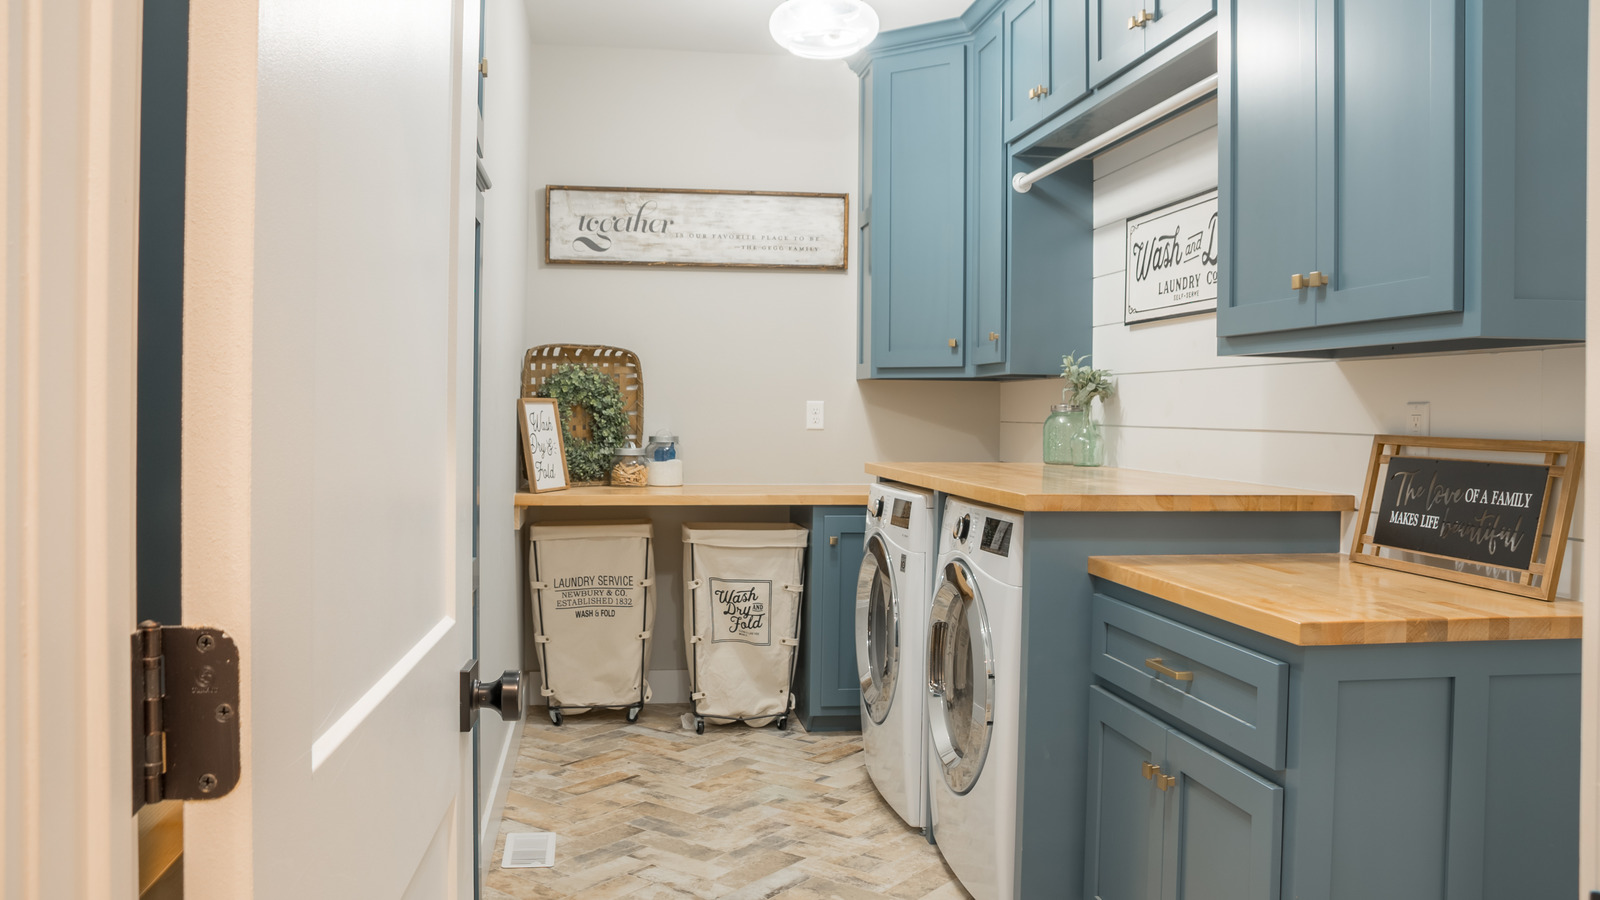 https://www.housedigest.com/img/gallery/the-best-products-at-target-to-help-you-organize-your-laundry-room/l-intro-1668850276.jpg